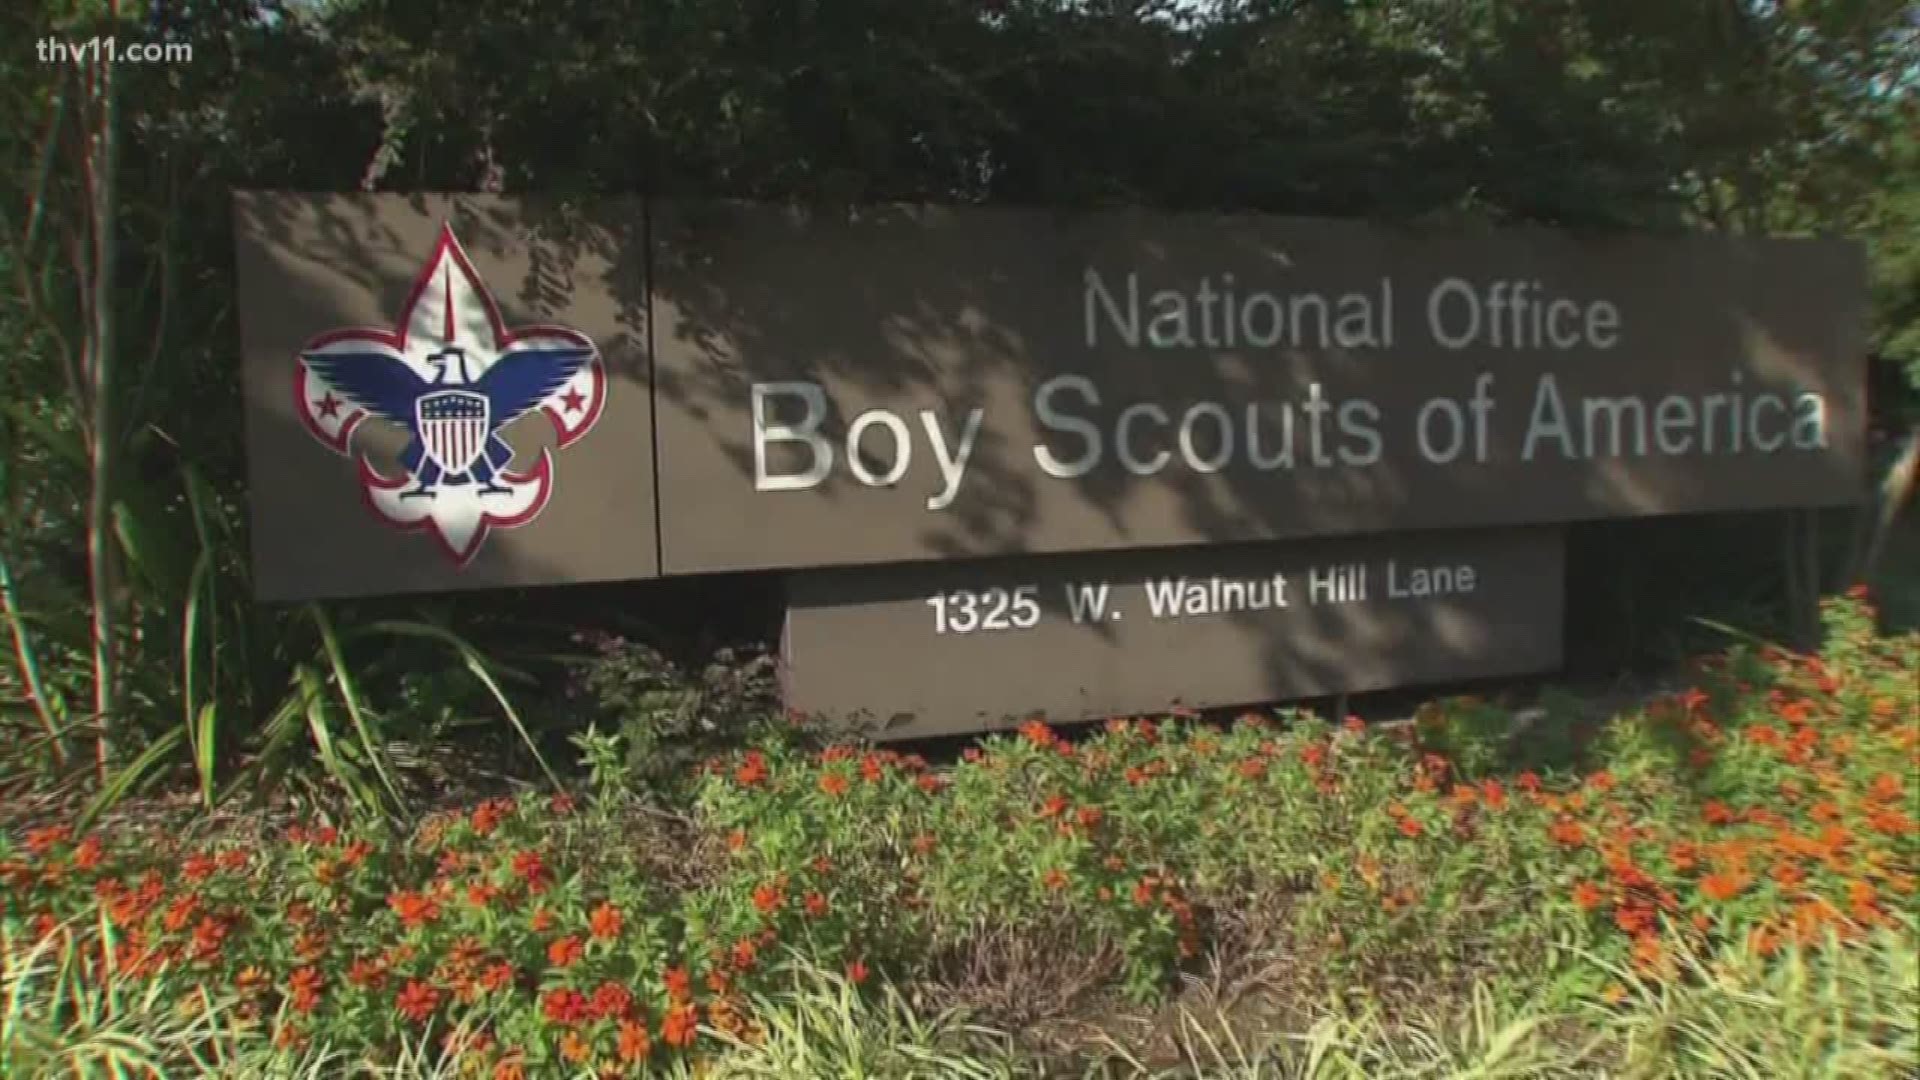 William Stevens claims Boy Scouts of America knew his leader was a pedophile.